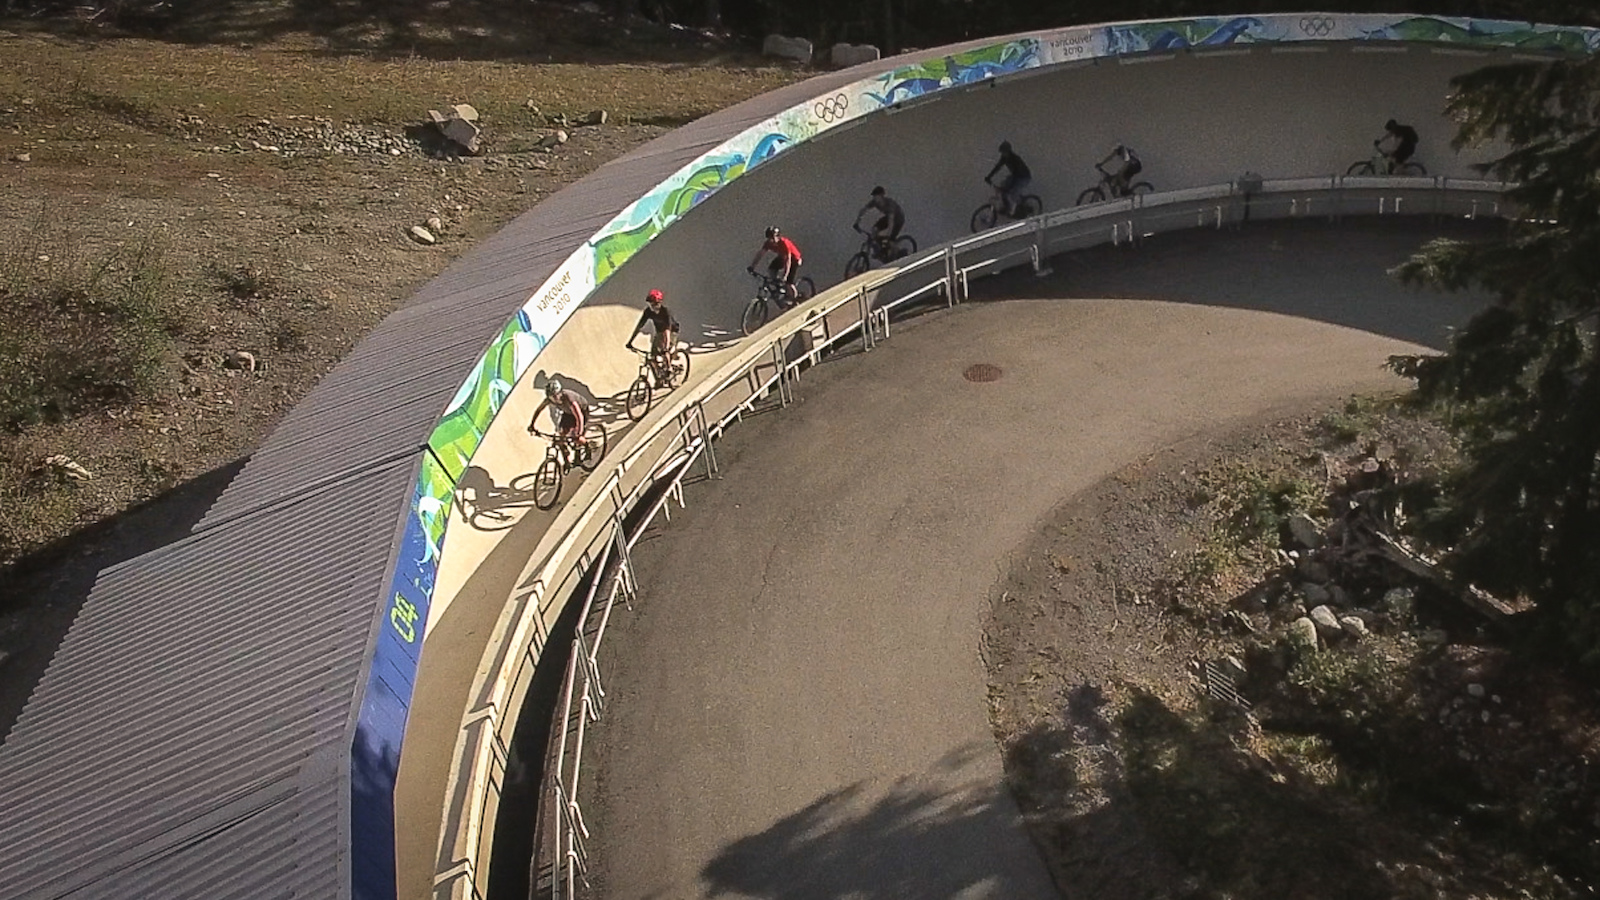 Even the climbs are interesting at the weekly Toonie rides in Whistler. Here riders ascend the bobsled track from the 2010 Vancouver Olympics on their way to Golden Boner.